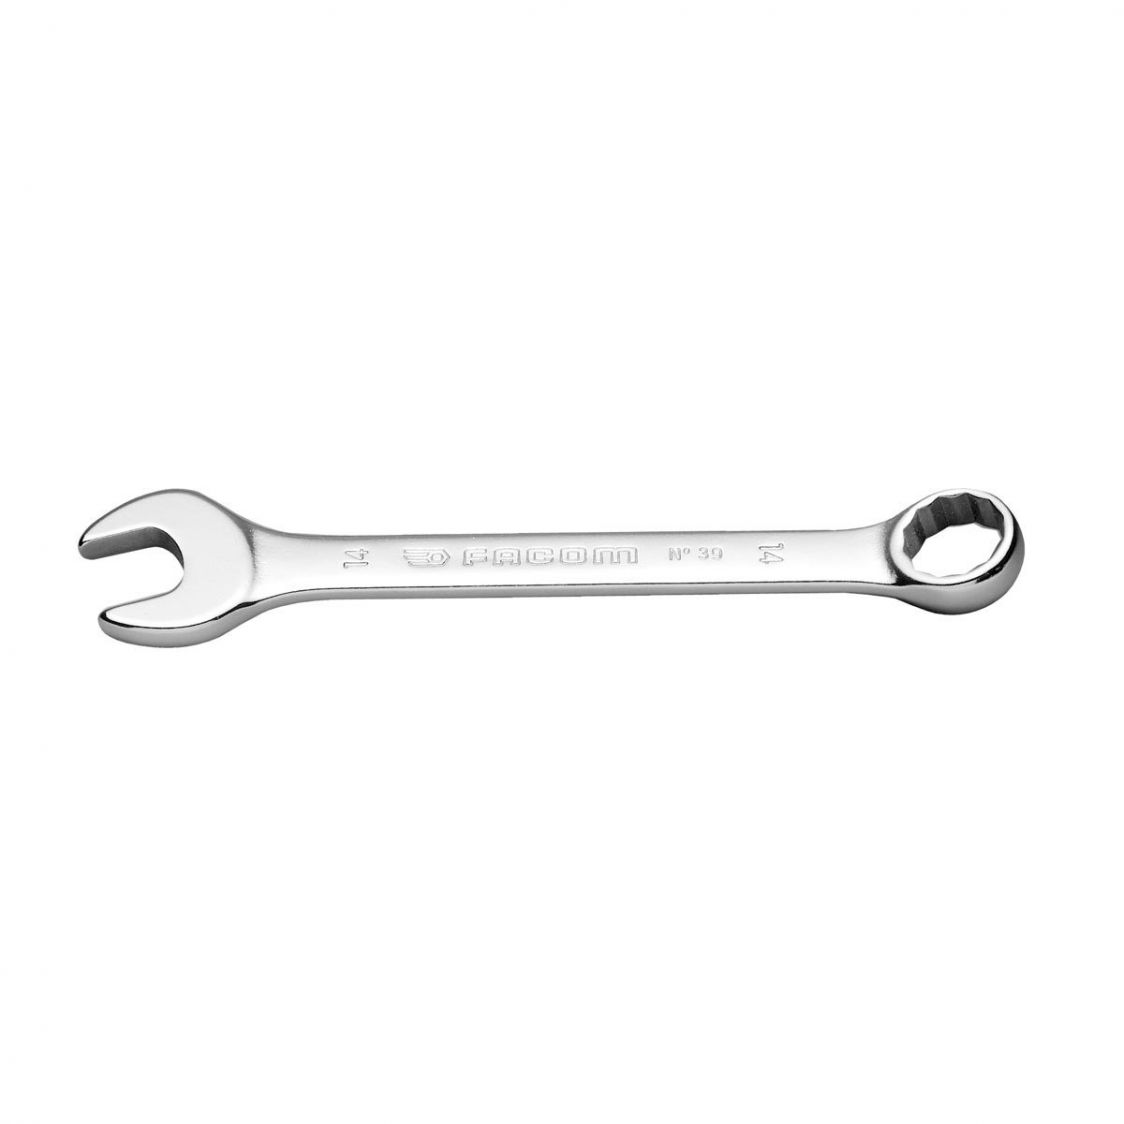 FACOM 39.4H - 4mm Metric Stubby Combination Spanner